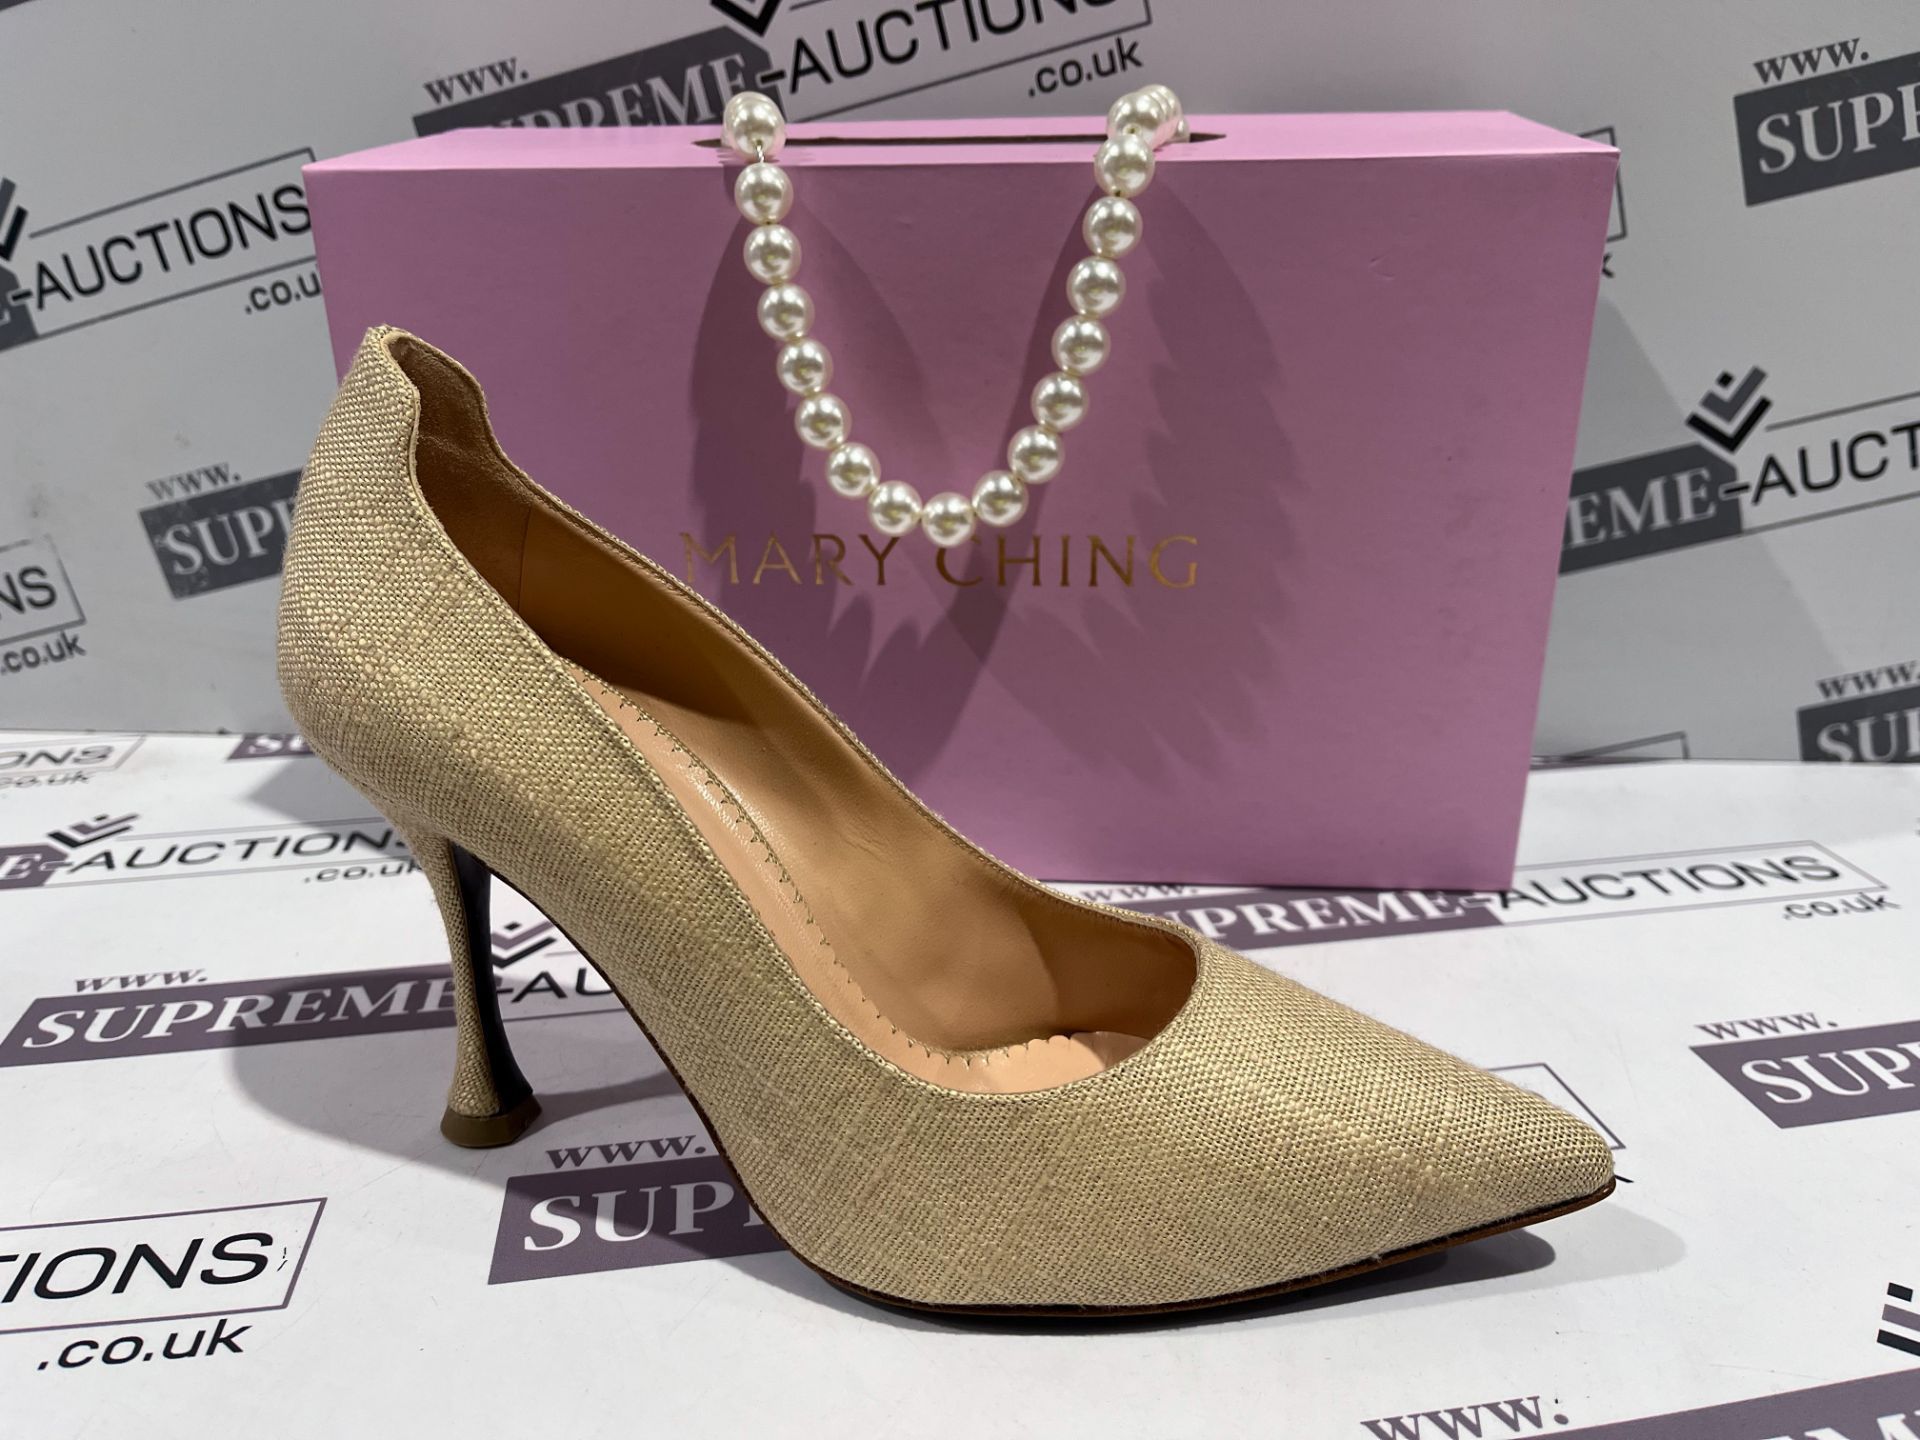 TRADE LOT 10 X NEW & BOXED OFFICIAL MARY CHING LUXURY SHOES IN VARIOUS STYLES AND SIZES - Image 2 of 4